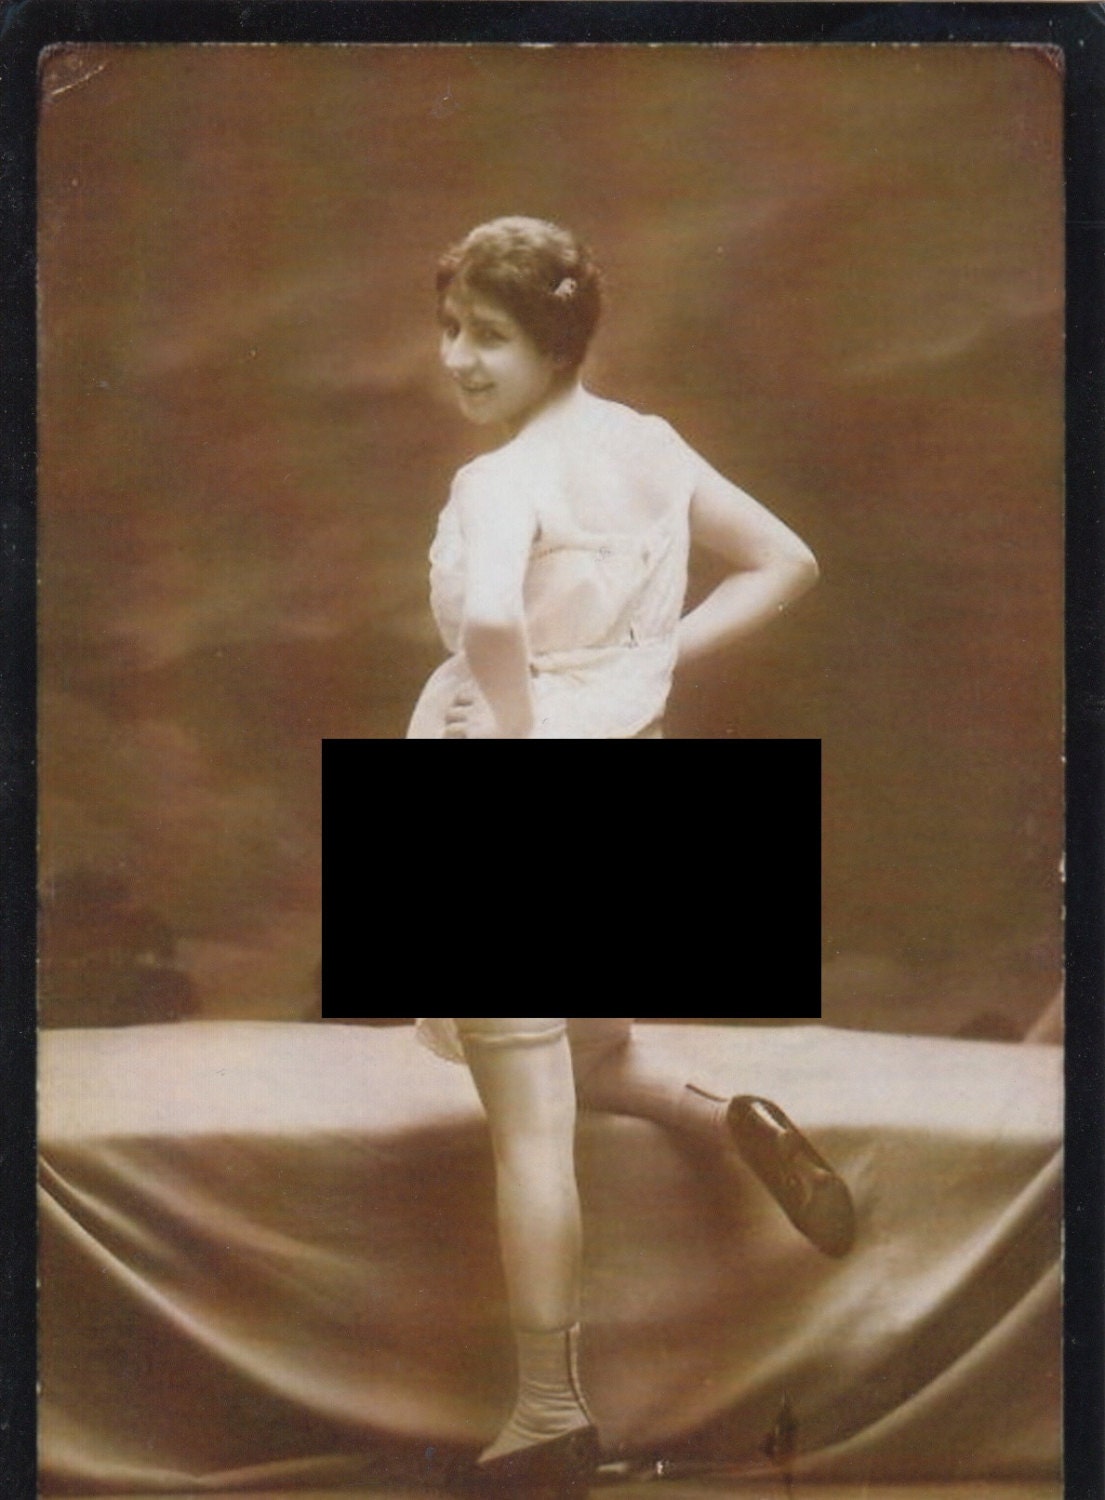 Reproduction Photo of a Vintage 1920s Erotic Postcard . hq image